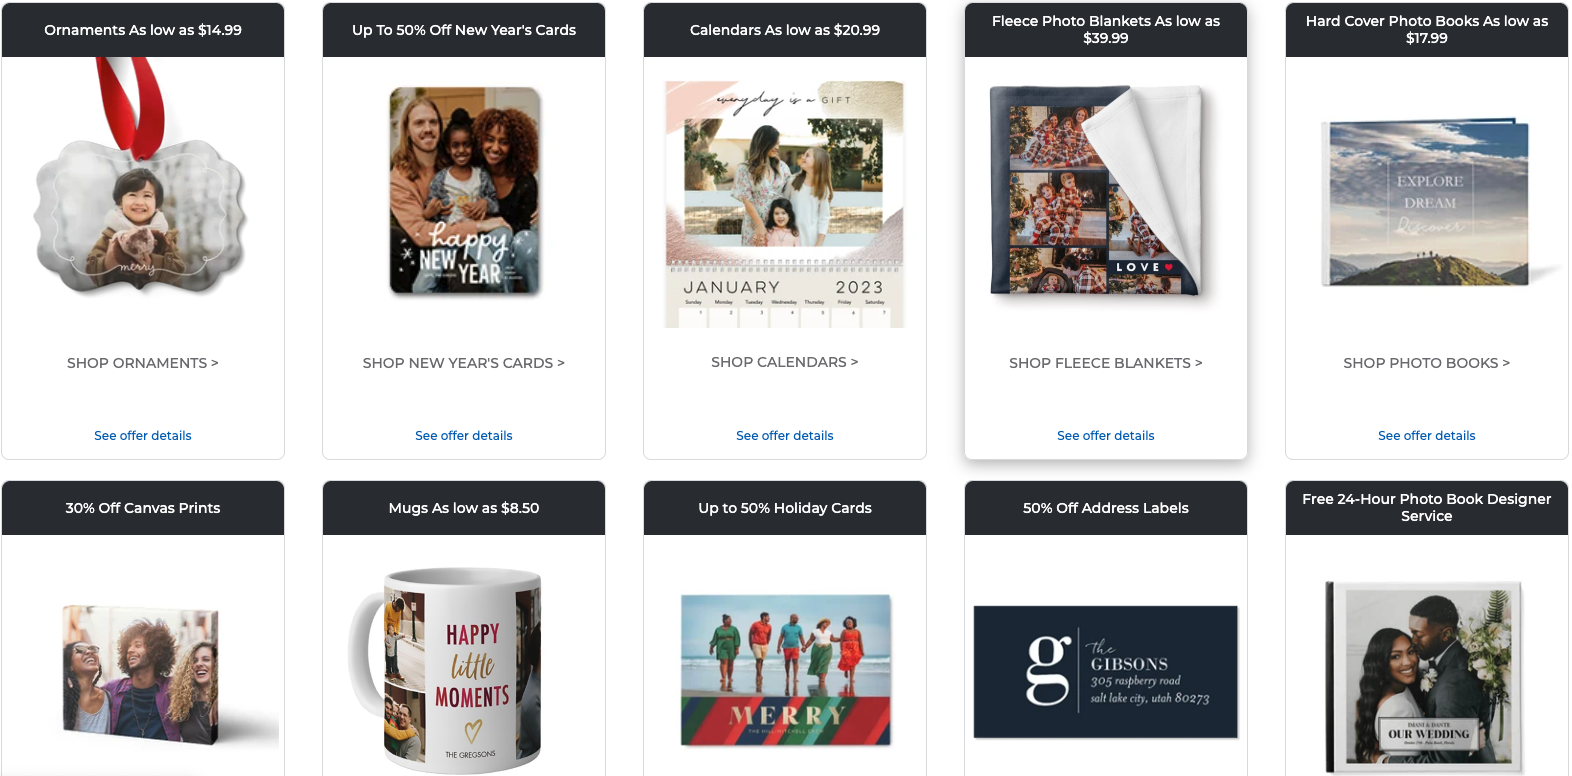 Shutterfly Promo Codes - Get 50% Off, December 2022